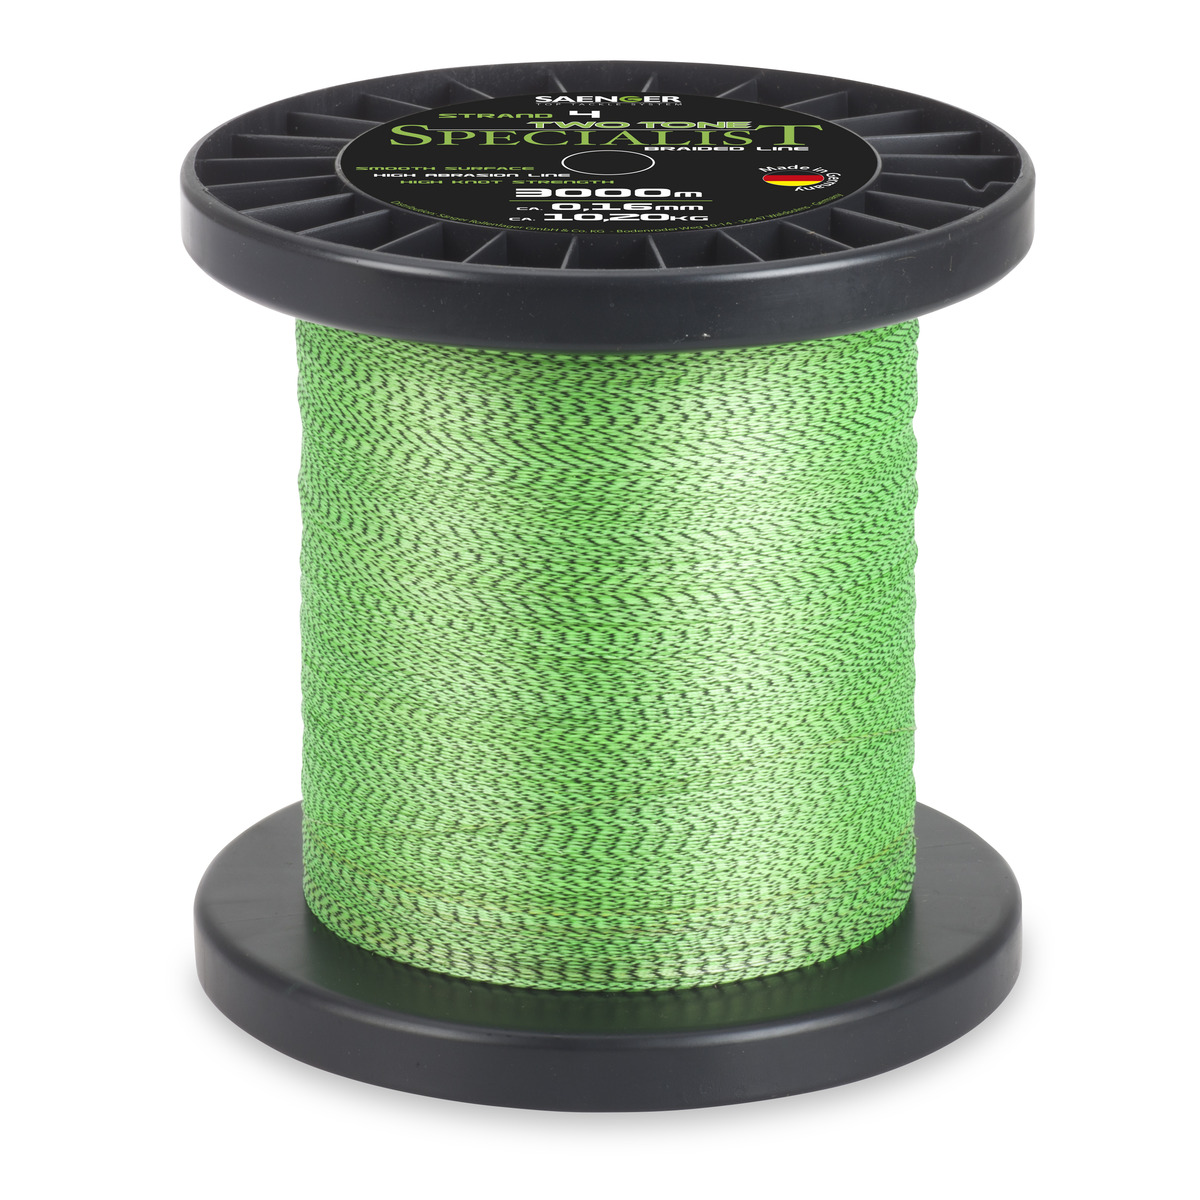 Saenger Specialist Two Tone Fluo Braid - 0,25 mm - 19,9 kg 3000 m